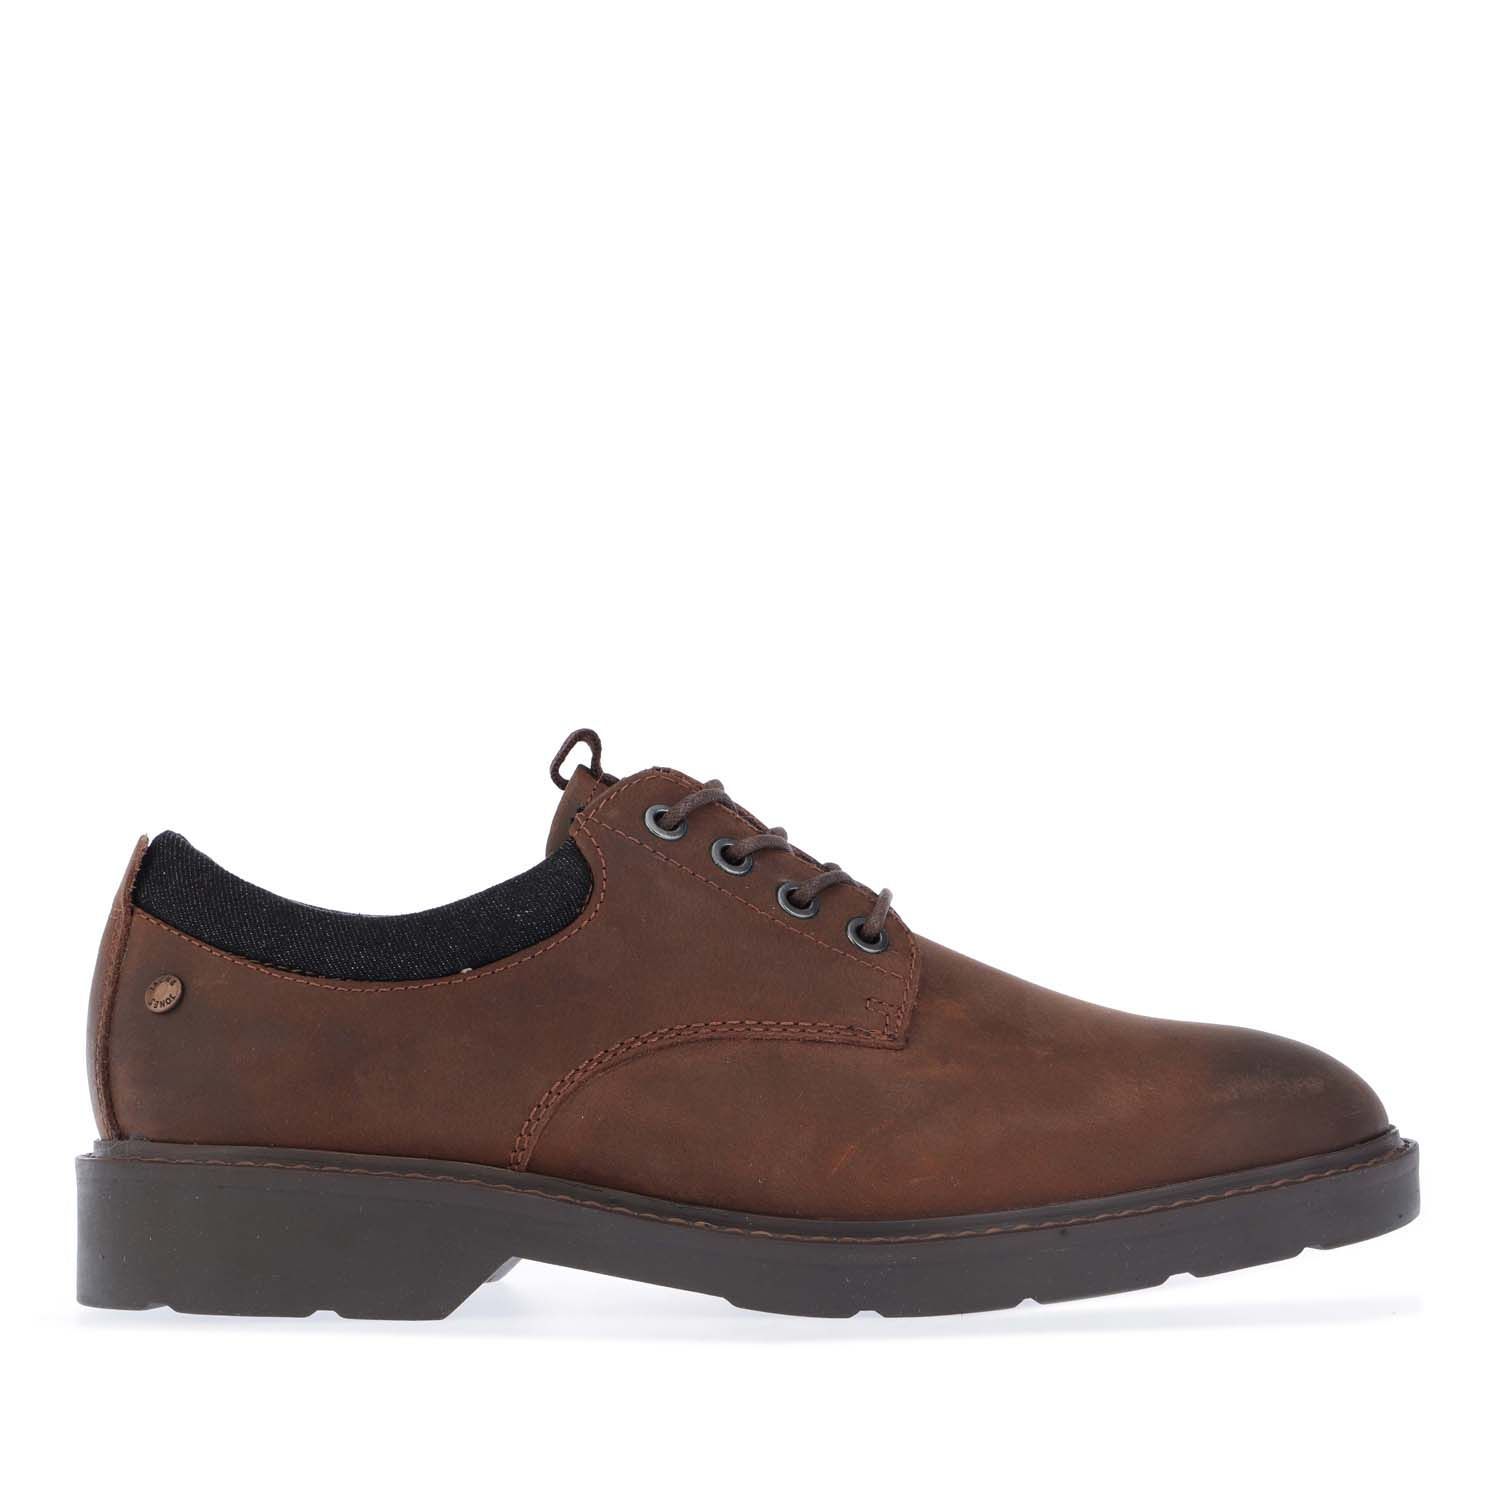 Mens Jack Jones Kimber Shoe in brown.- Leather upper.- Lace closure.- Branding on the tongue.- Rubber sole.- Ref: 12193071